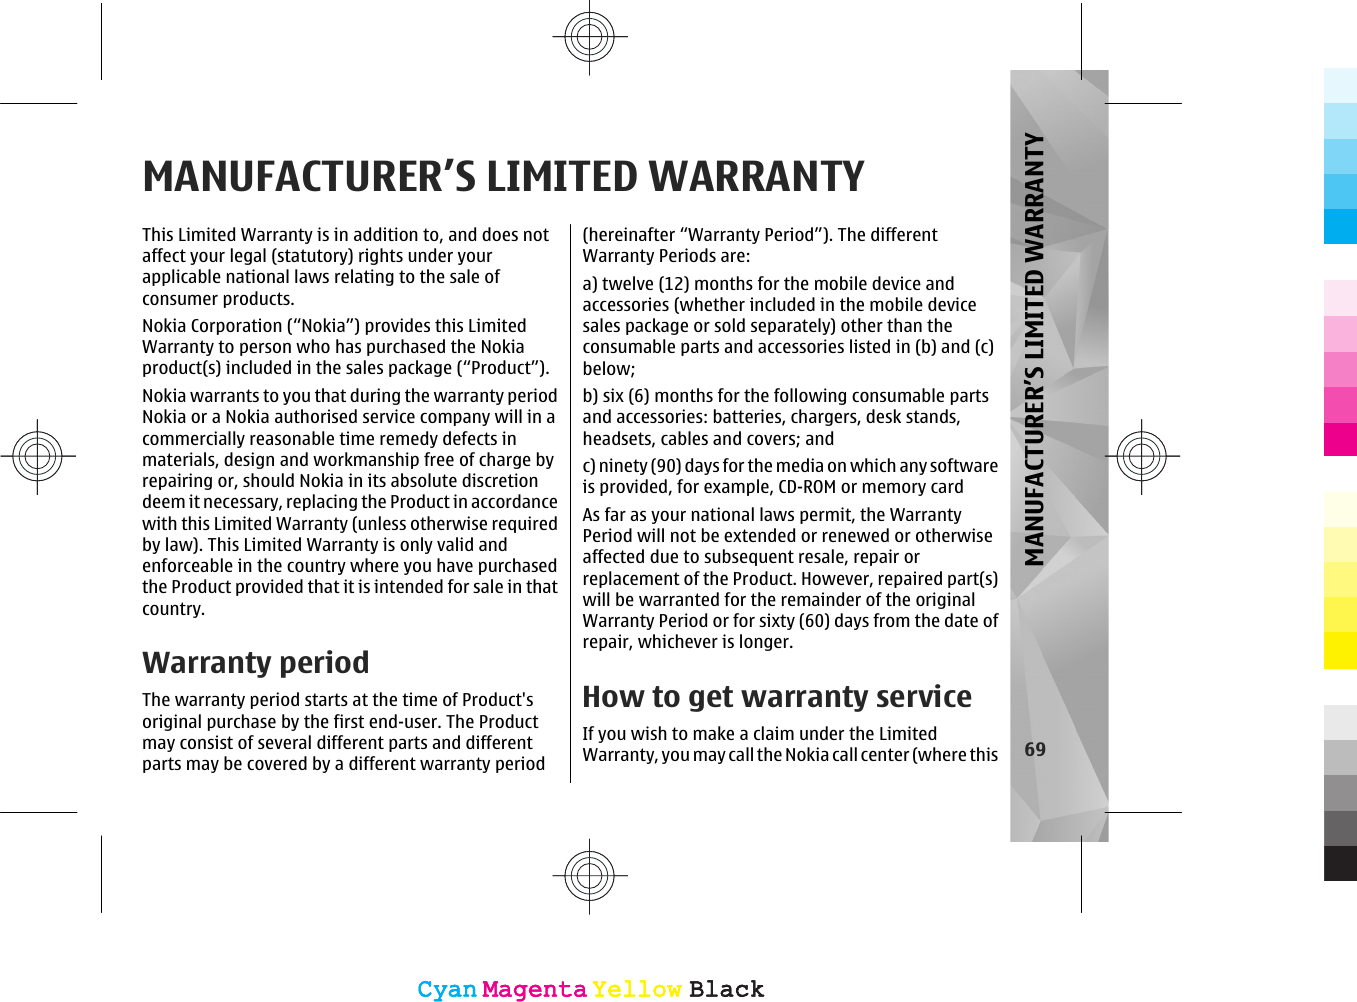 MANUFACTURER’S LIMITED WARRANTYThis Limited Warranty is in addition to, and does notaffect your legal (statutory) rights under yourapplicable national laws relating to the sale ofconsumer products.Nokia Corporation (“Nokia”) provides this LimitedWarranty to person who has purchased the Nokiaproduct(s) included in the sales package (“Product”).Nokia warrants to you that during the warranty periodNokia or a Nokia authorised service company will in acommercially reasonable time remedy defects inmaterials, design and workmanship free of charge byrepairing or, should Nokia in its absolute discretiondeem it necessary, replacing the Product in accordancewith this Limited Warranty (unless otherwise requiredby law). This Limited Warranty is only valid andenforceable in the country where you have purchasedthe Product provided that it is intended for sale in thatcountry.Warranty periodThe warranty period starts at the time of Product&apos;soriginal purchase by the first end-user. The Productmay consist of several different parts and differentparts may be covered by a different warranty period(hereinafter “Warranty Period”). The differentWarranty Periods are:a) twelve (12) months for the mobile device andaccessories (whether included in the mobile devicesales package or sold separately) other than theconsumable parts and accessories listed in (b) and (c)below;b) six (6) months for the following consumable partsand accessories: batteries, chargers, desk stands,headsets, cables and covers; andc) ninety (90) days for the media on which any softwareis provided, for example, CD-ROM or memory cardAs far as your national laws permit, the WarrantyPeriod will not be extended or renewed or otherwiseaffected due to subsequent resale, repair orreplacement of the Product. However, repaired part(s)will be warranted for the remainder of the originalWarranty Period or for sixty (60) days from the date ofrepair, whichever is longer.How to get warranty serviceIf you wish to make a claim under the LimitedWarranty, you may call the Nokia call center (where this 69MANUFACTURER’S LIMITED WARRANTYCyanCyanMagentaMagentaYellowYellowBlackBlackCyanCyanMagentaMagentaYellowYellowBlackBlack